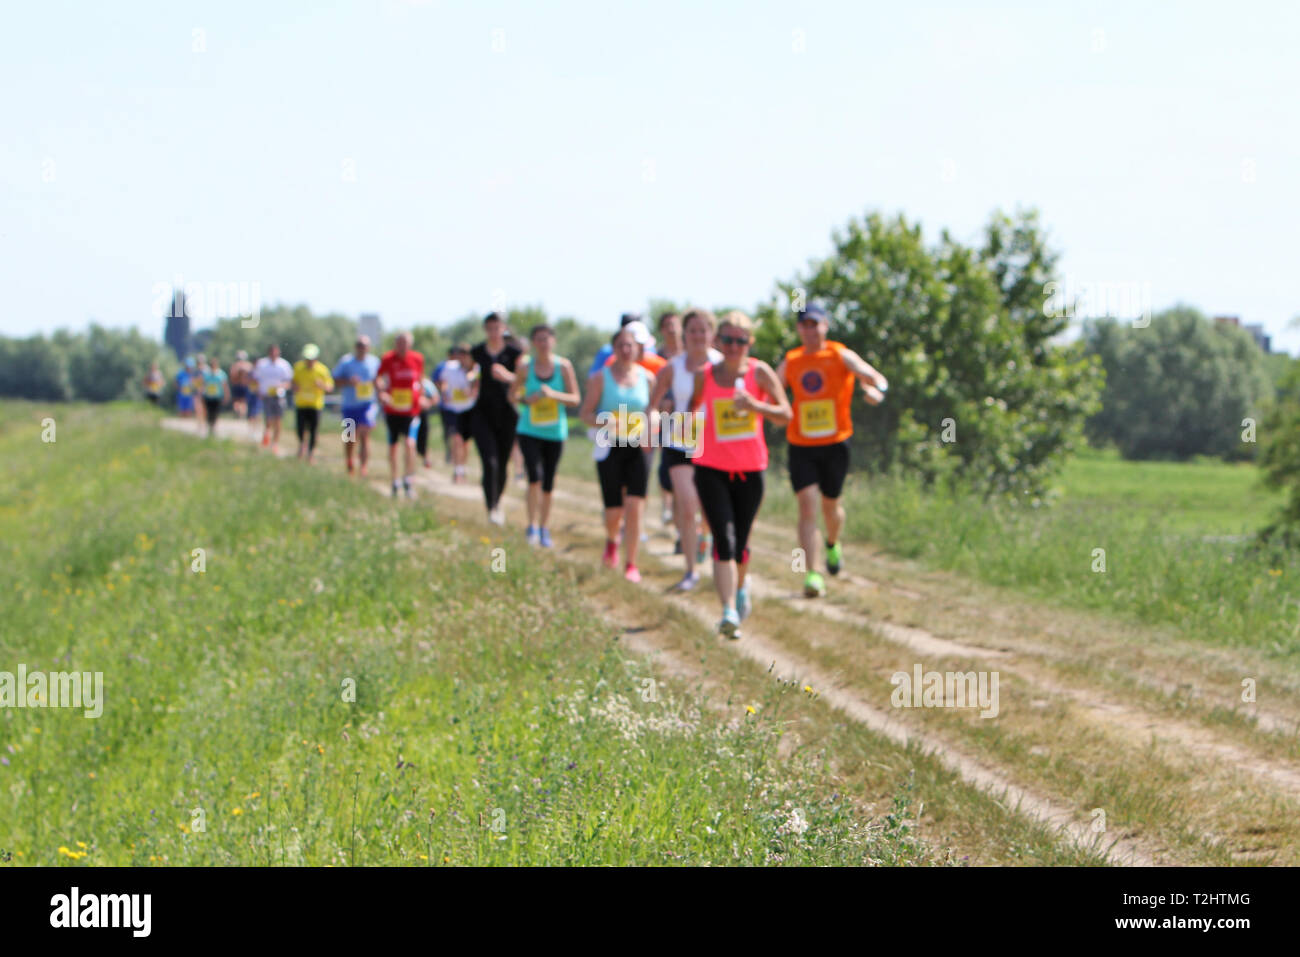 A lot of people on Marathon running in nature, blured motion Stock Photo